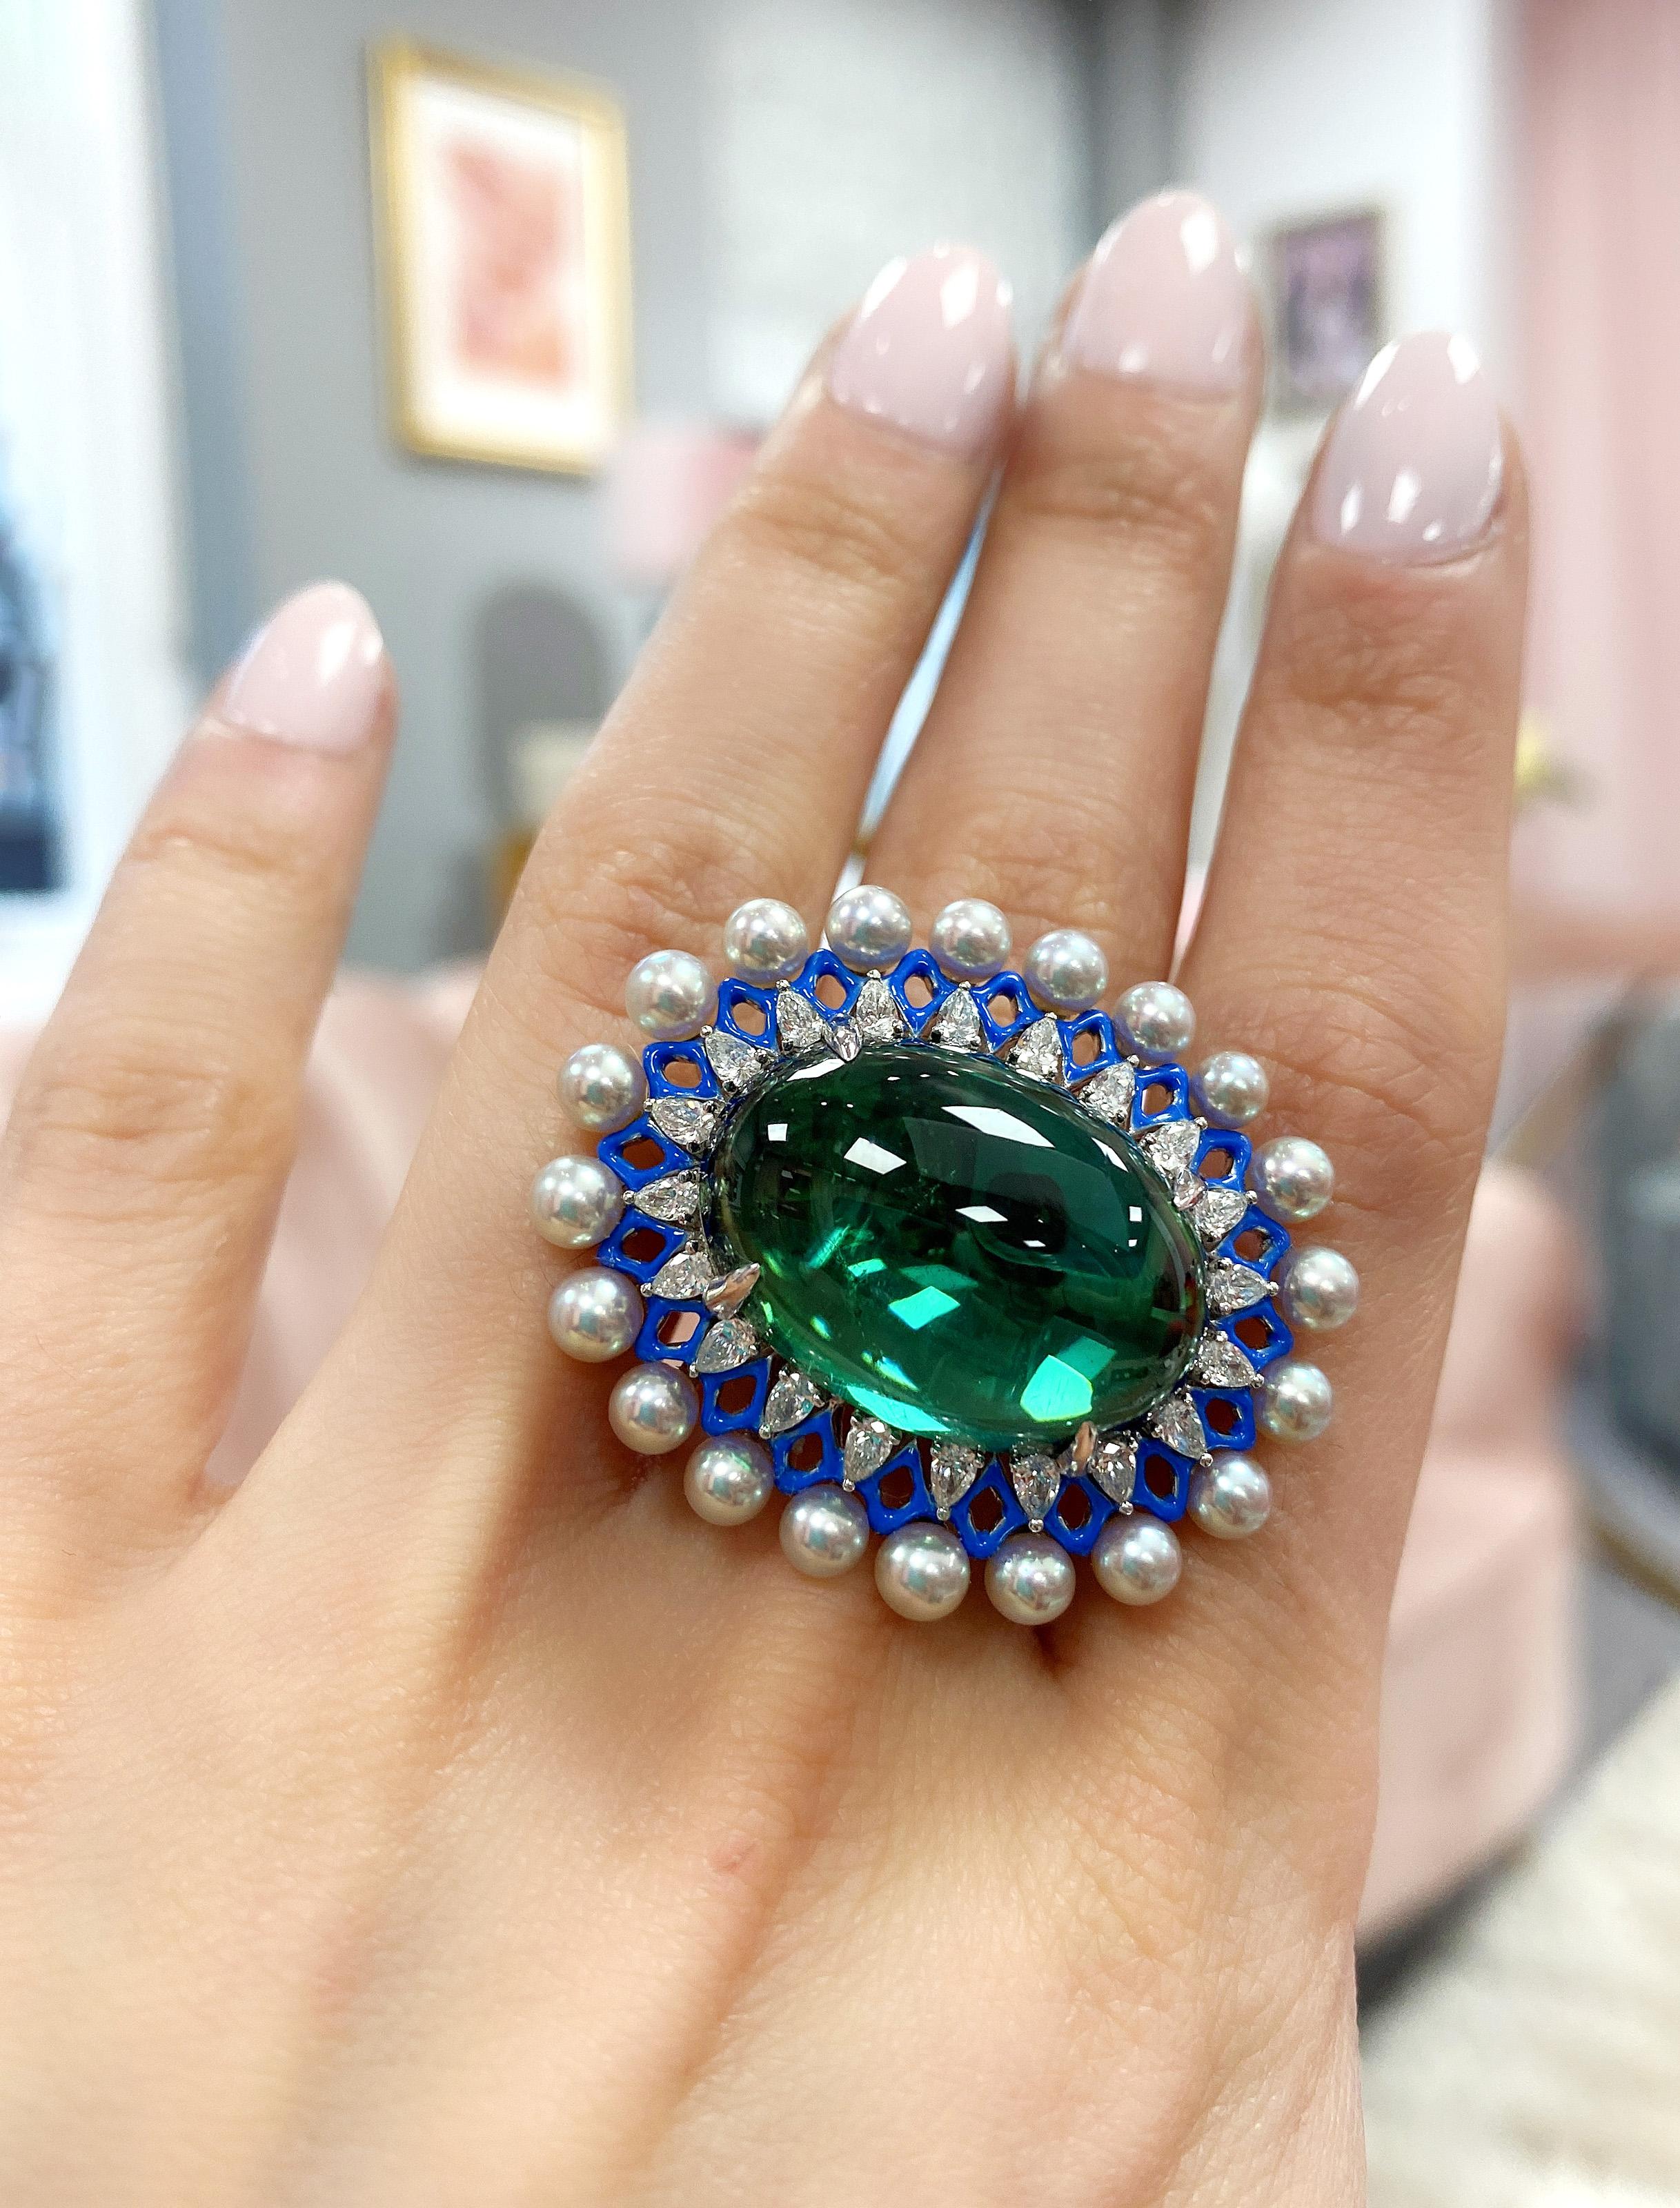 Green Tourmaline Cabachon and Akoya Pearls with Diamonds and Enamel Ring For Sale 1